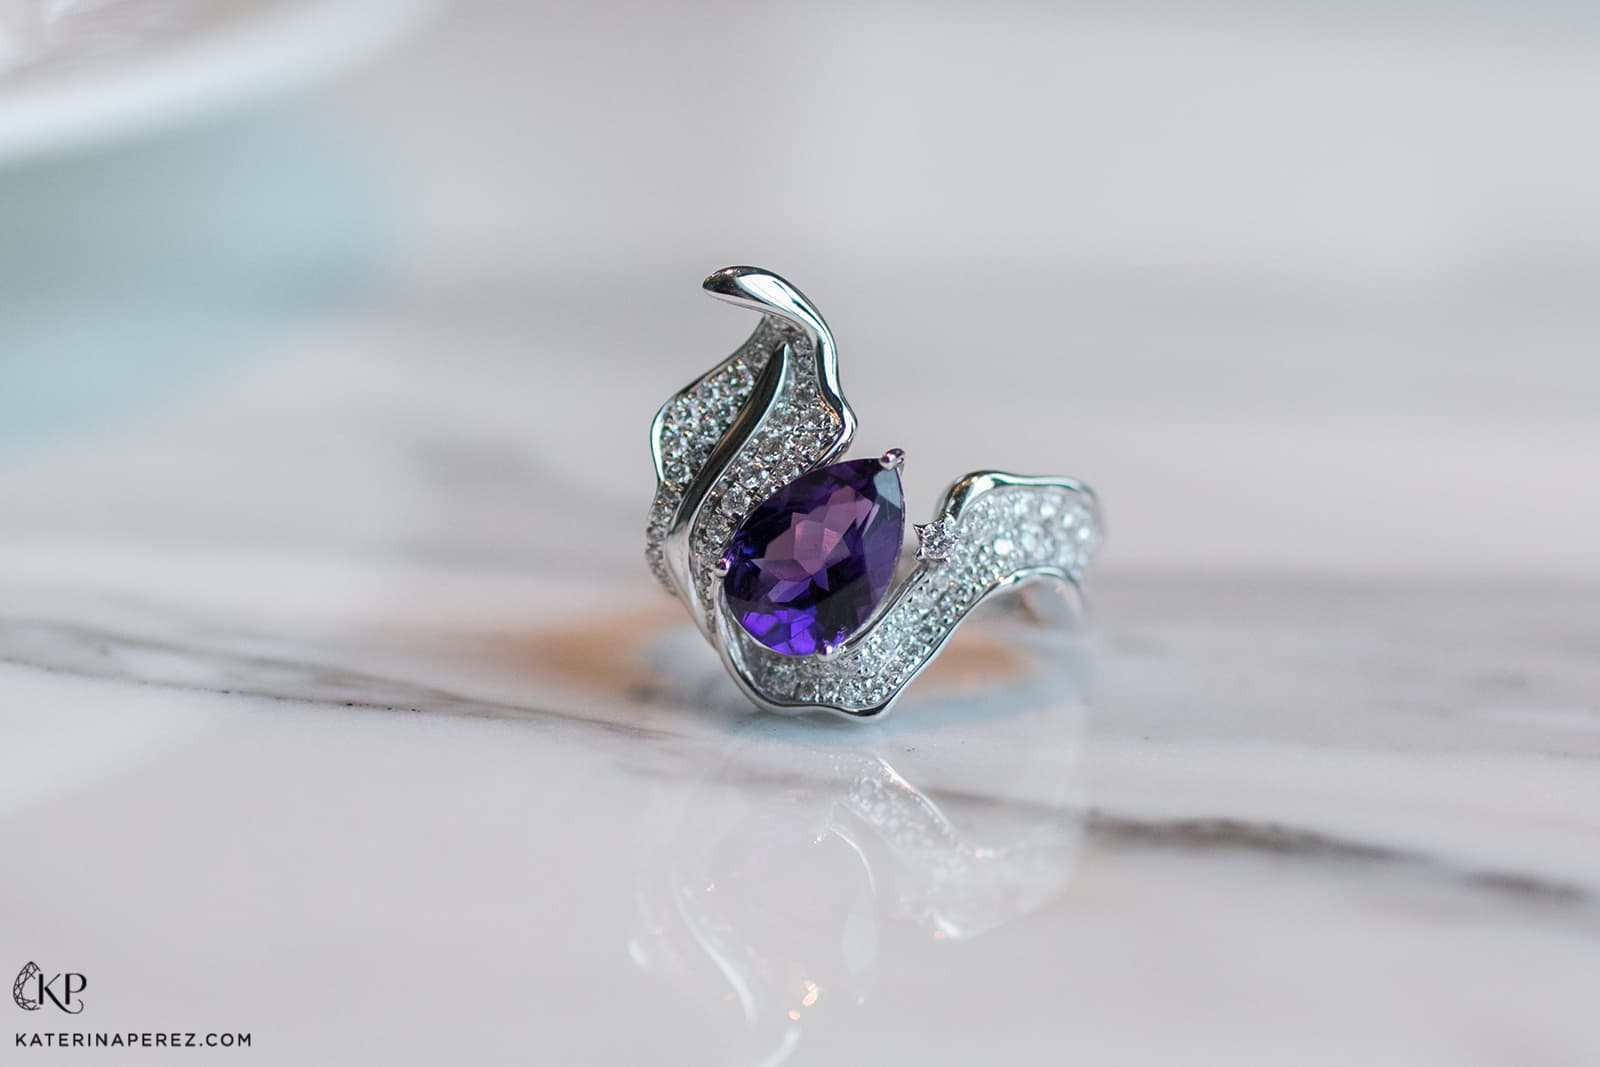 Simone Jewels x Katerina Perez jewellery collaboration ring with amethyst and diamonds in recycled white gold